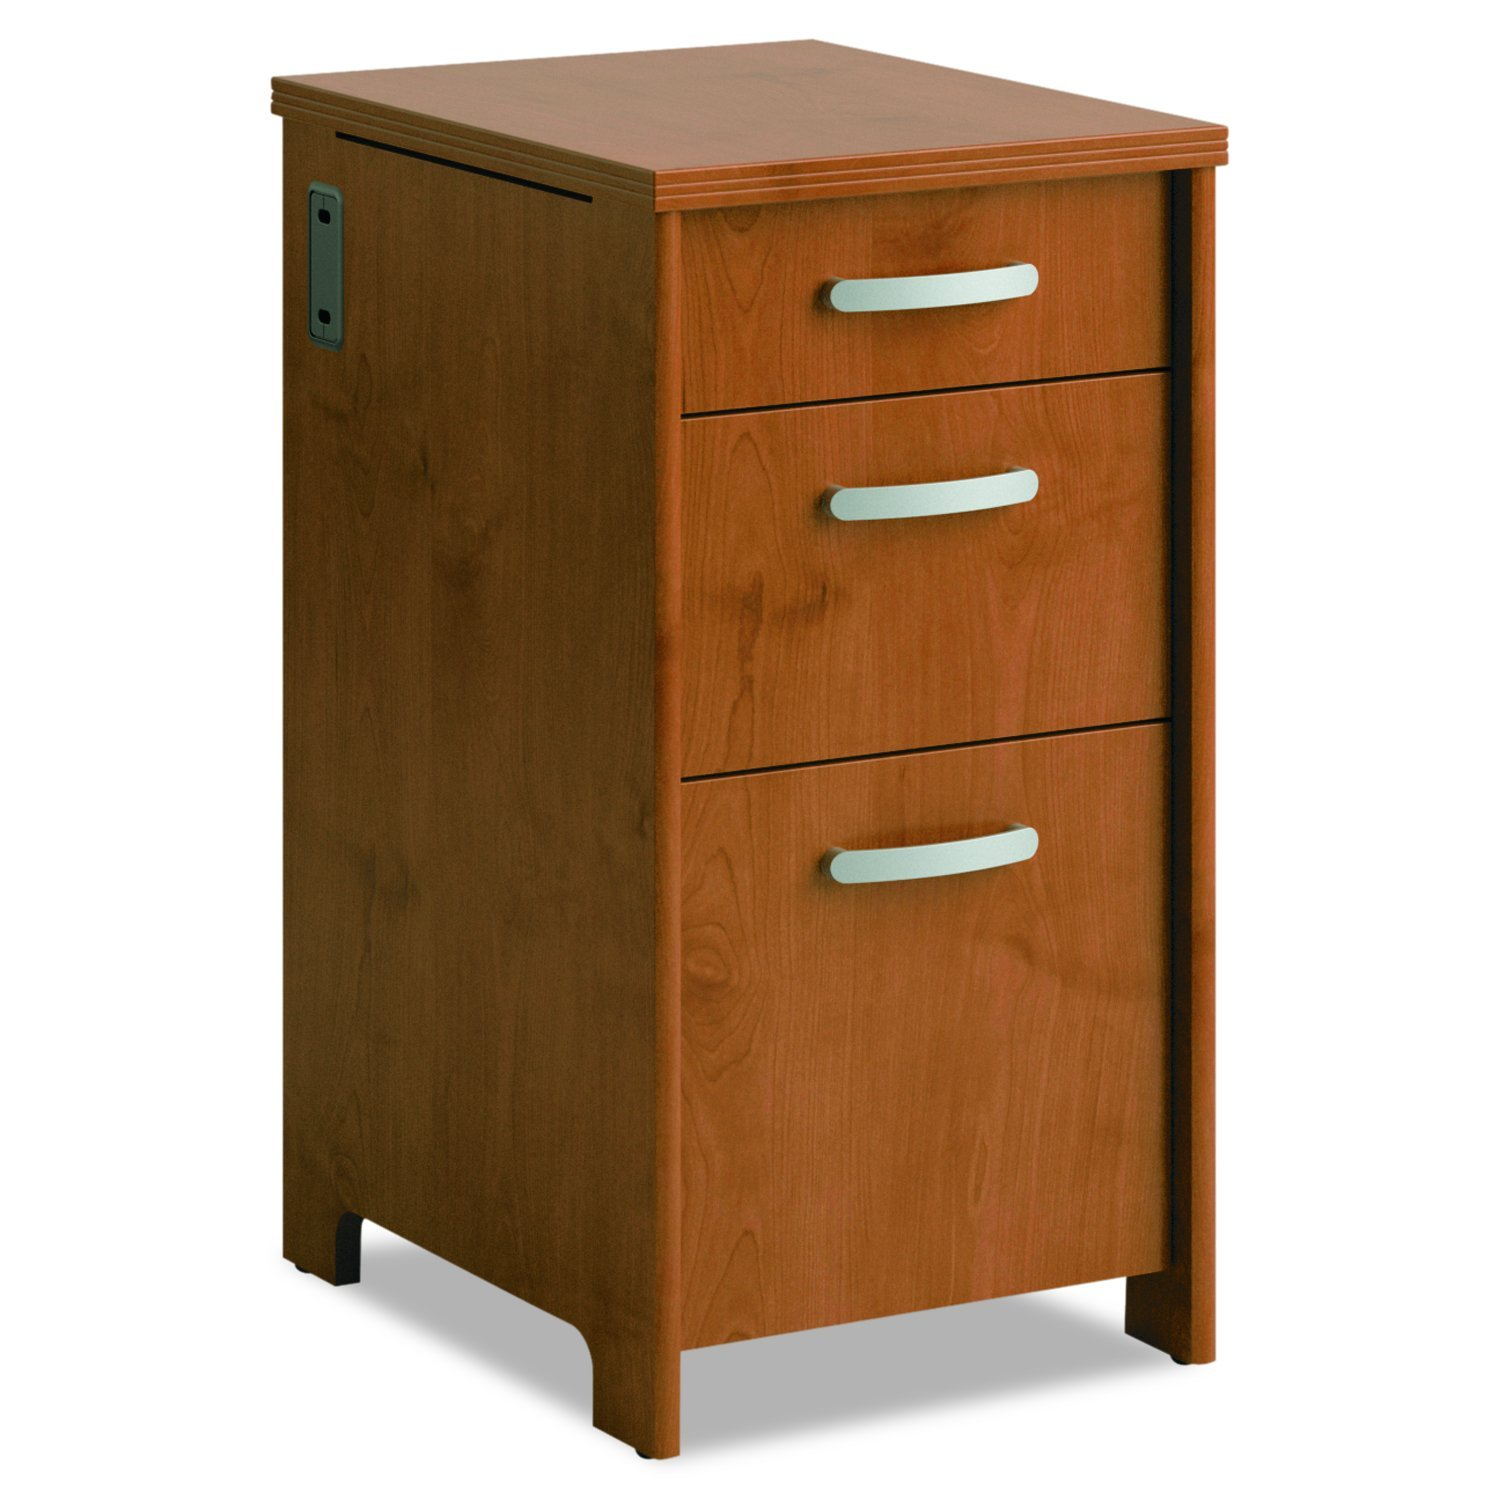 Top 20 Wooden File Cabinets With Drawers for dimensions 1500 X 1500